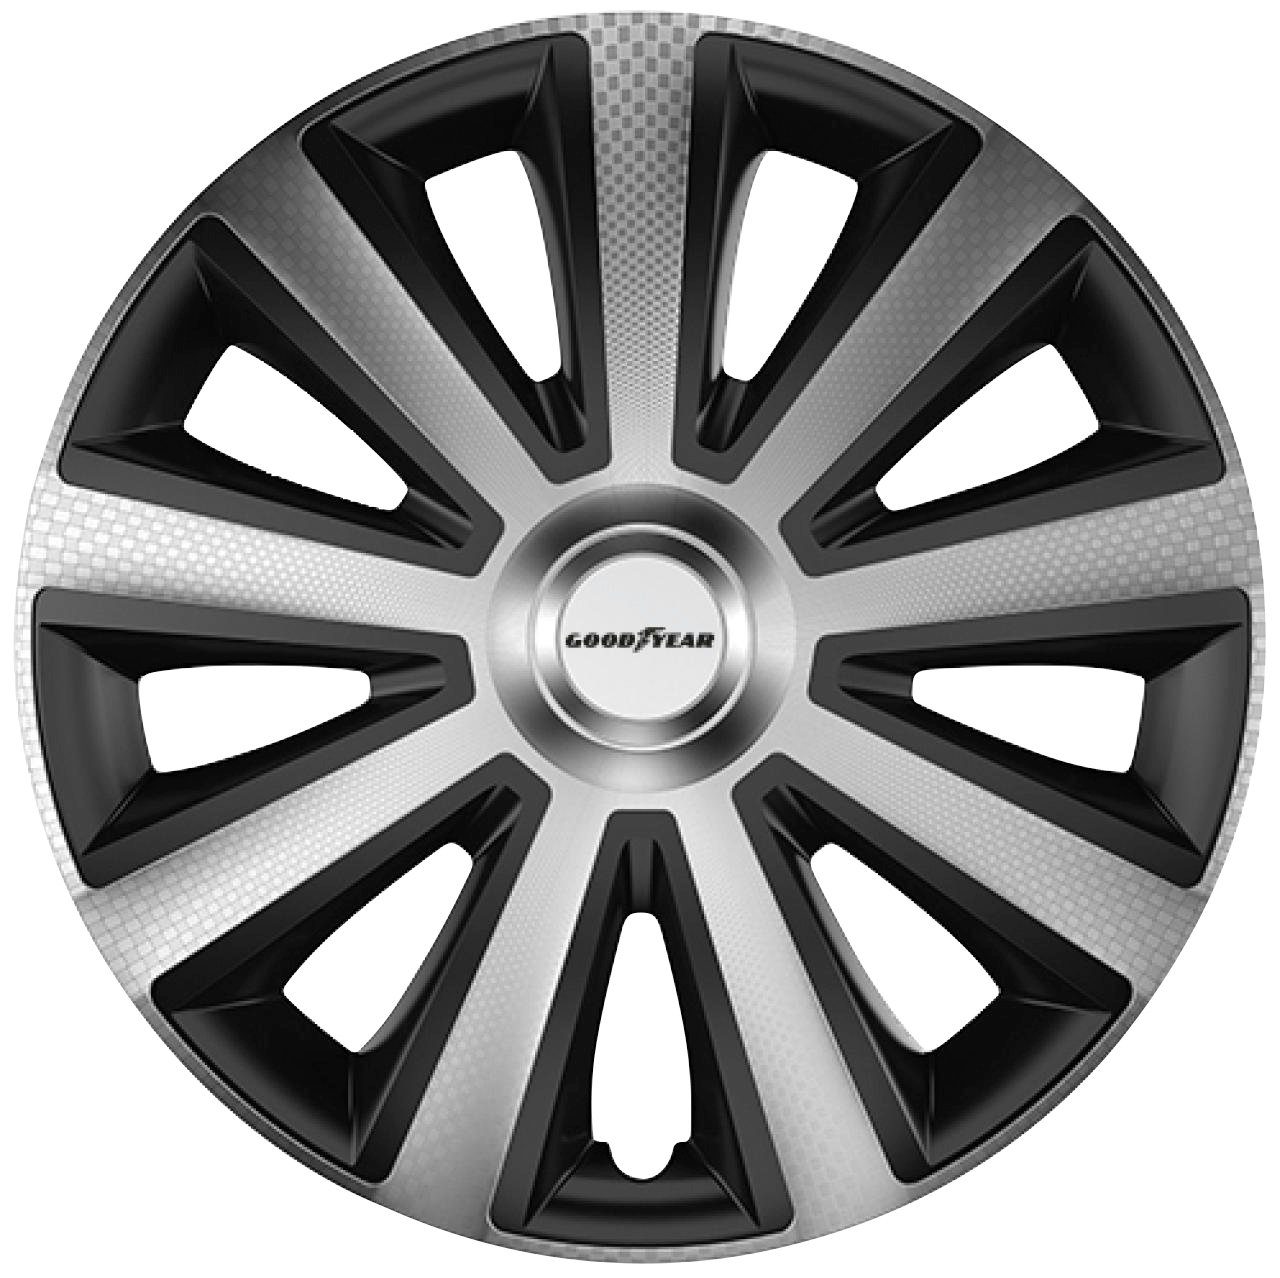 Goodyear Radkappe Memphis Carbon 16, 16 in Zoll, (Set, 4-St)